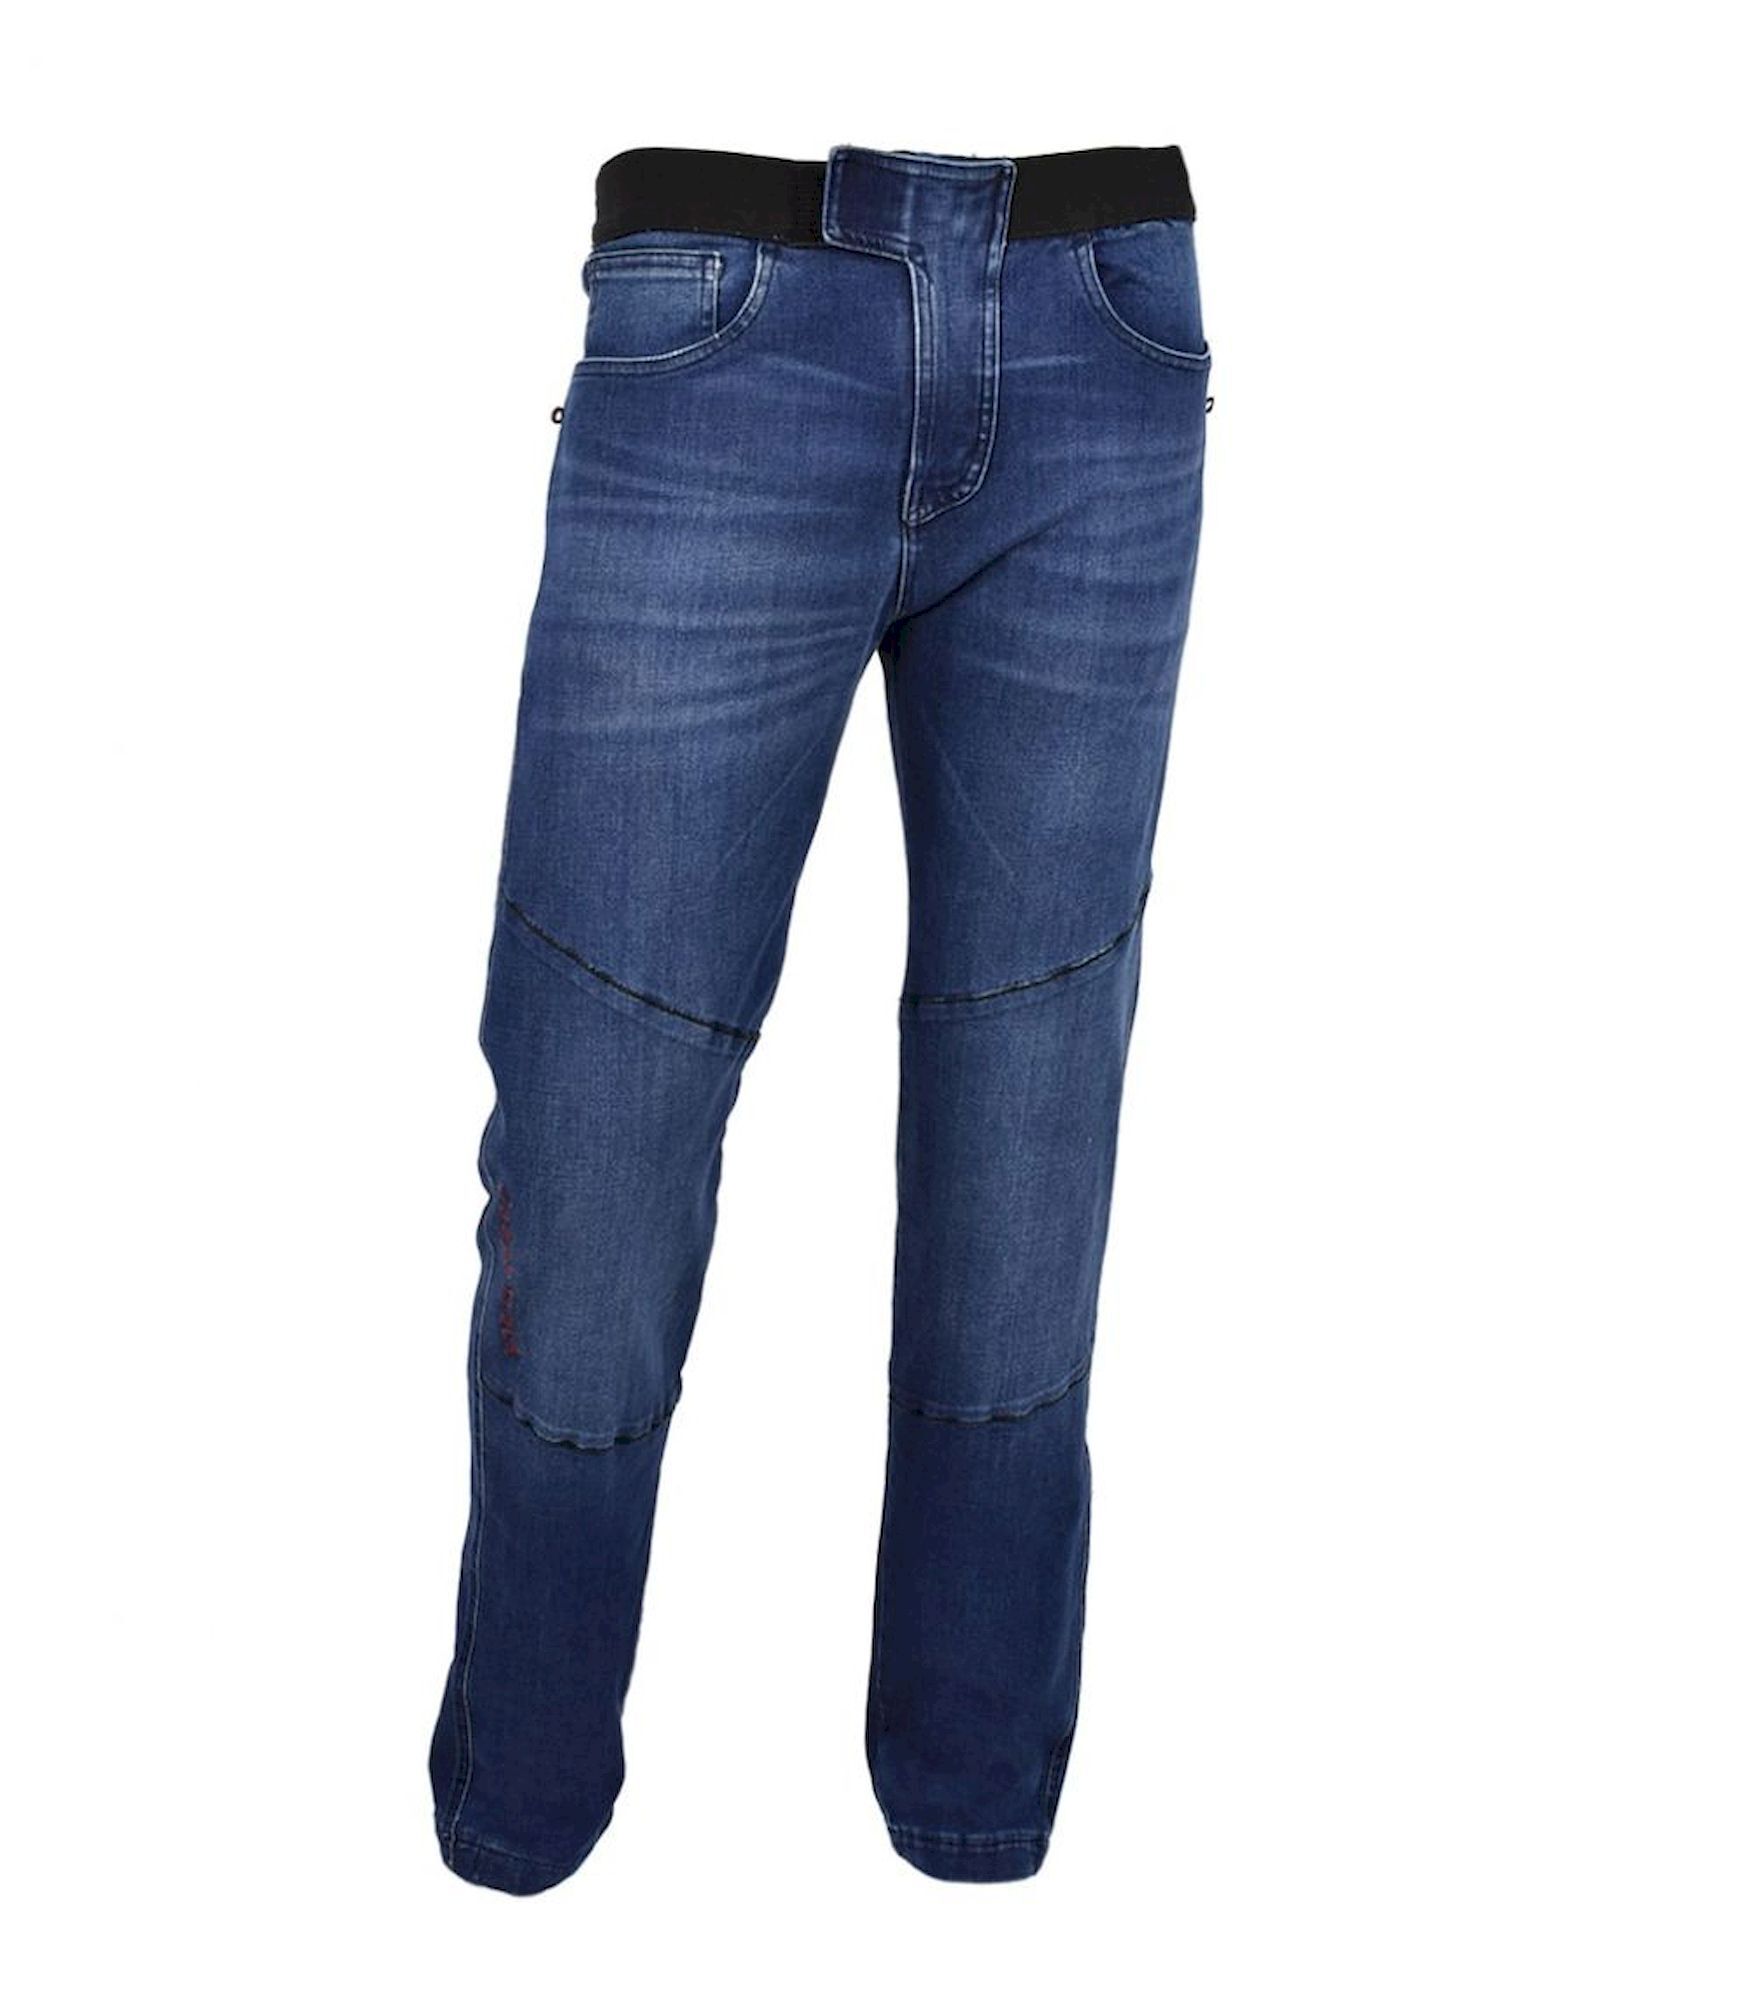 JeansTrack Turia Jeans - Climbing trousers - Men's | Hardloop